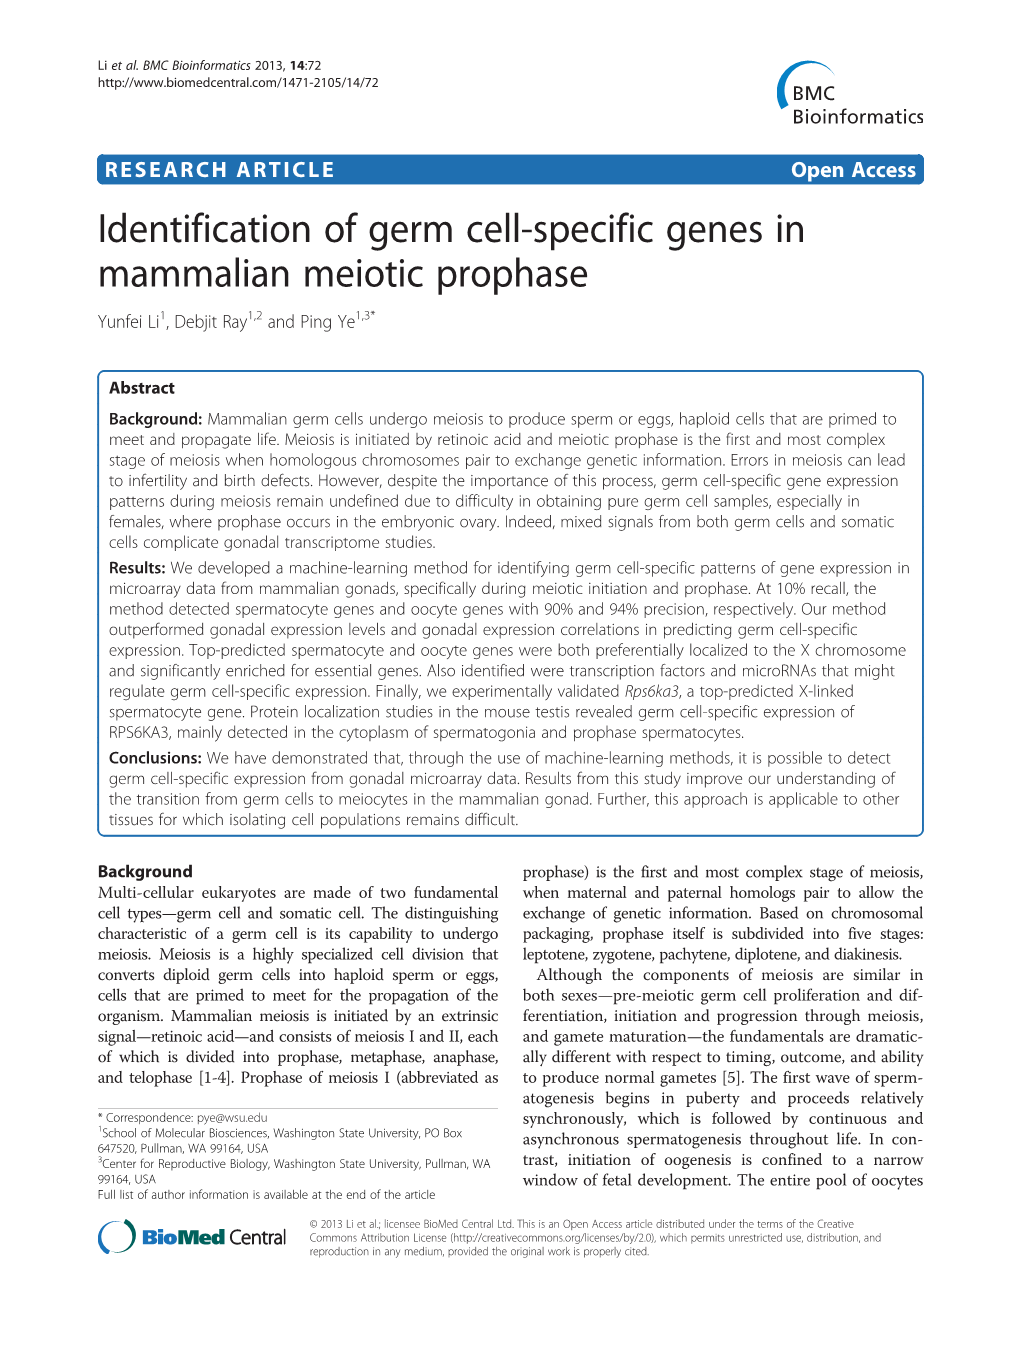 Identification of Germ Cell-Specific Genes in Mammalian Meiotic Prophase Yunfei Li1, Debjit Ray1,2 and Ping Ye1,3*